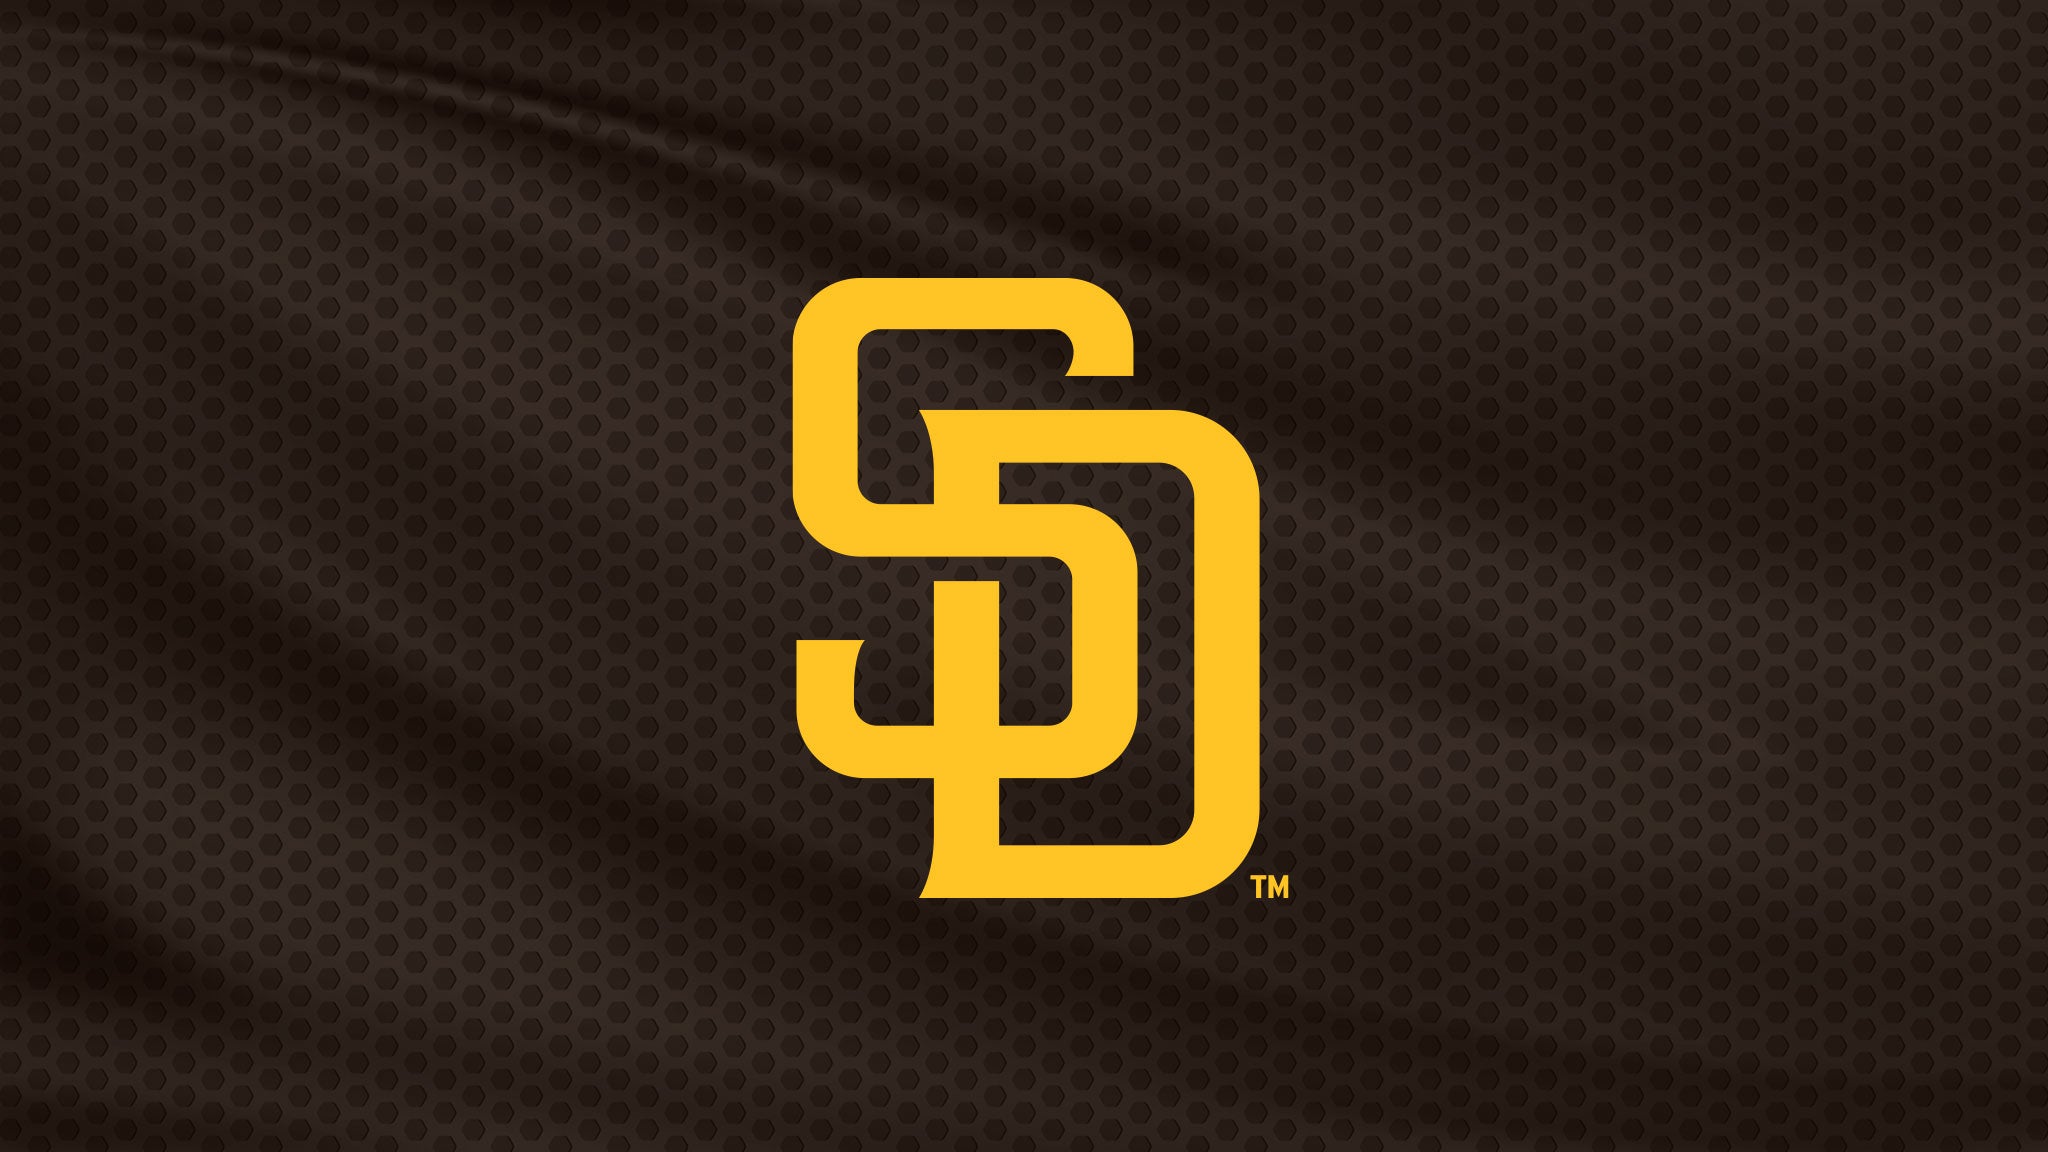 san diego padres game tickets